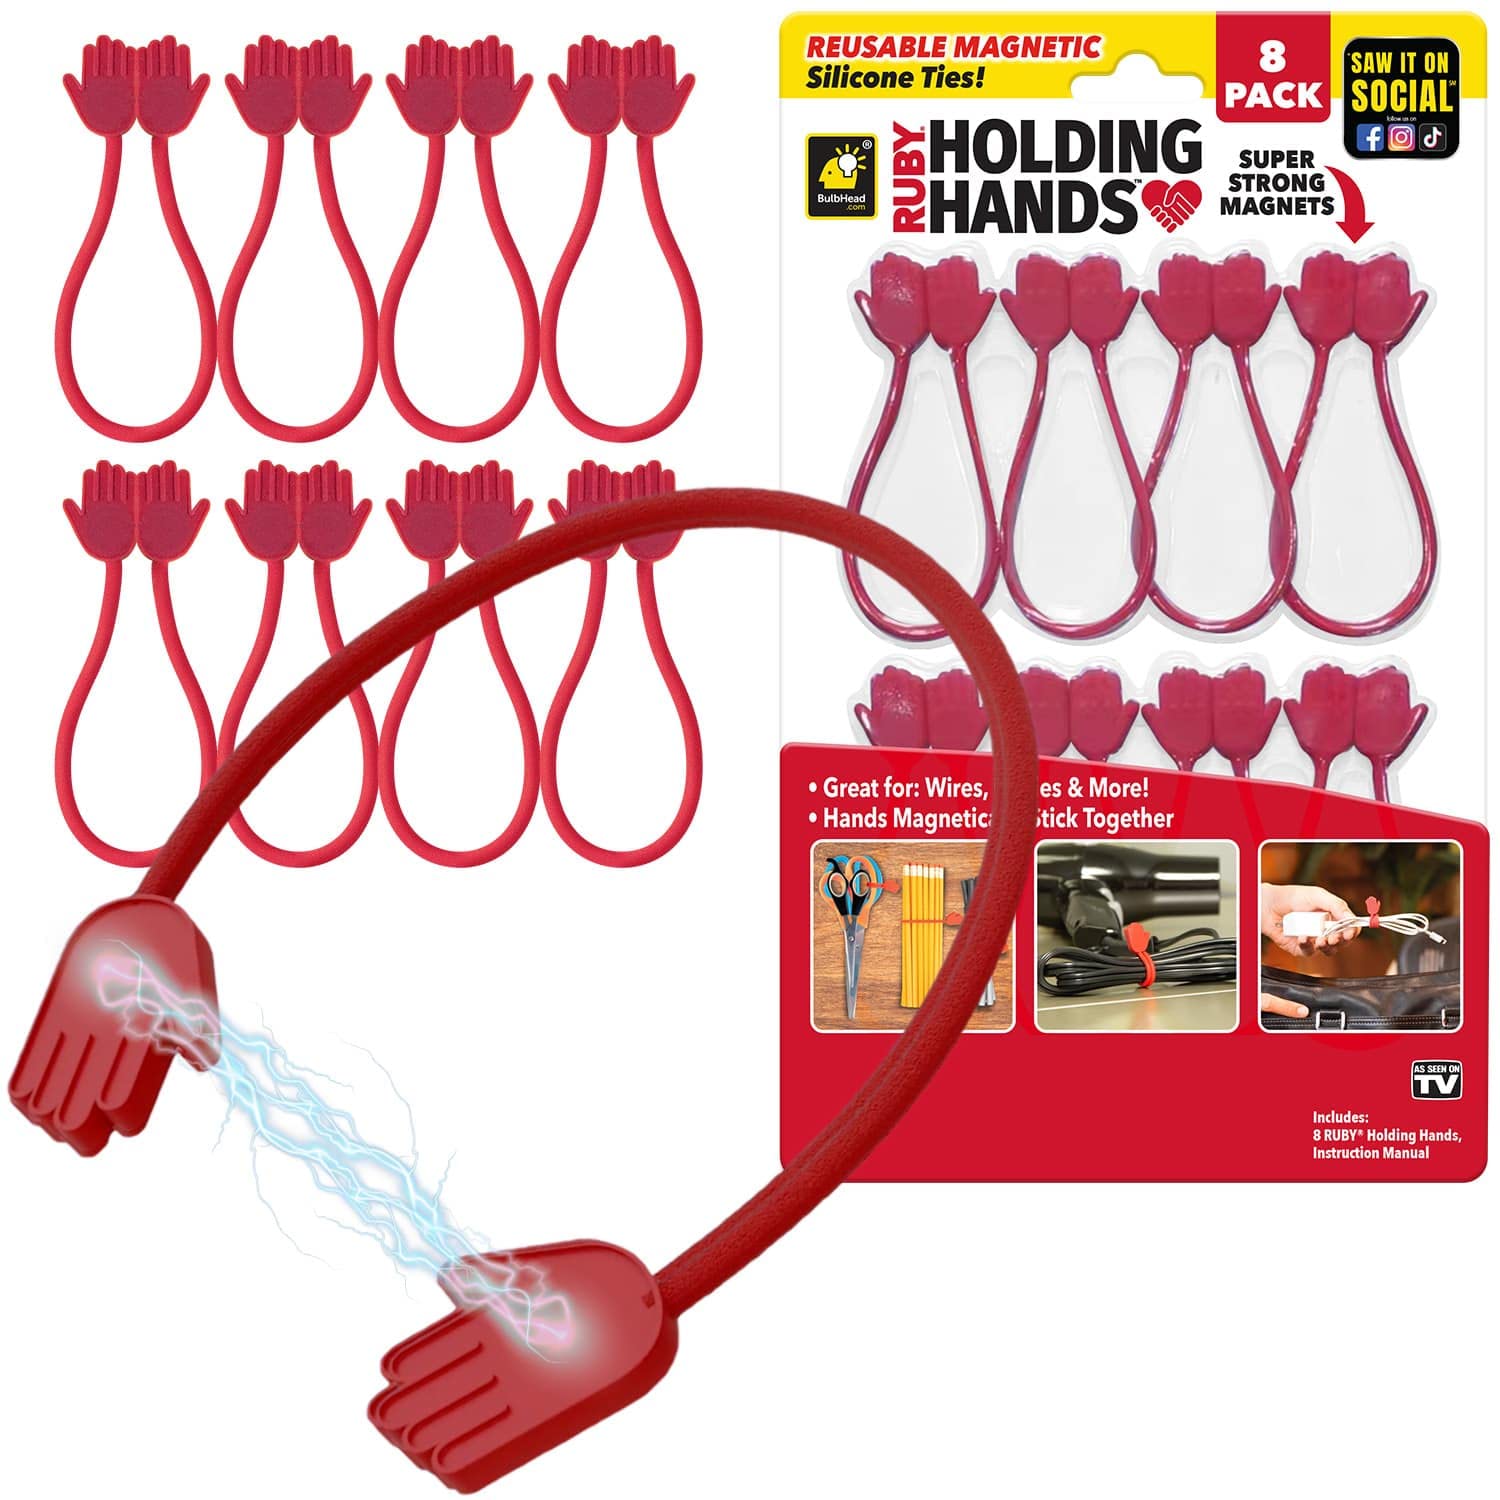 Ruby Holding Hands Ultra-Powerful Magnetic Silicone Zip Ties, AS-SEEN-ON-TV, Industrial-Strength Cable Ties with Magnet Automatically Stick Together, Reusable, Great for Cables, Cords